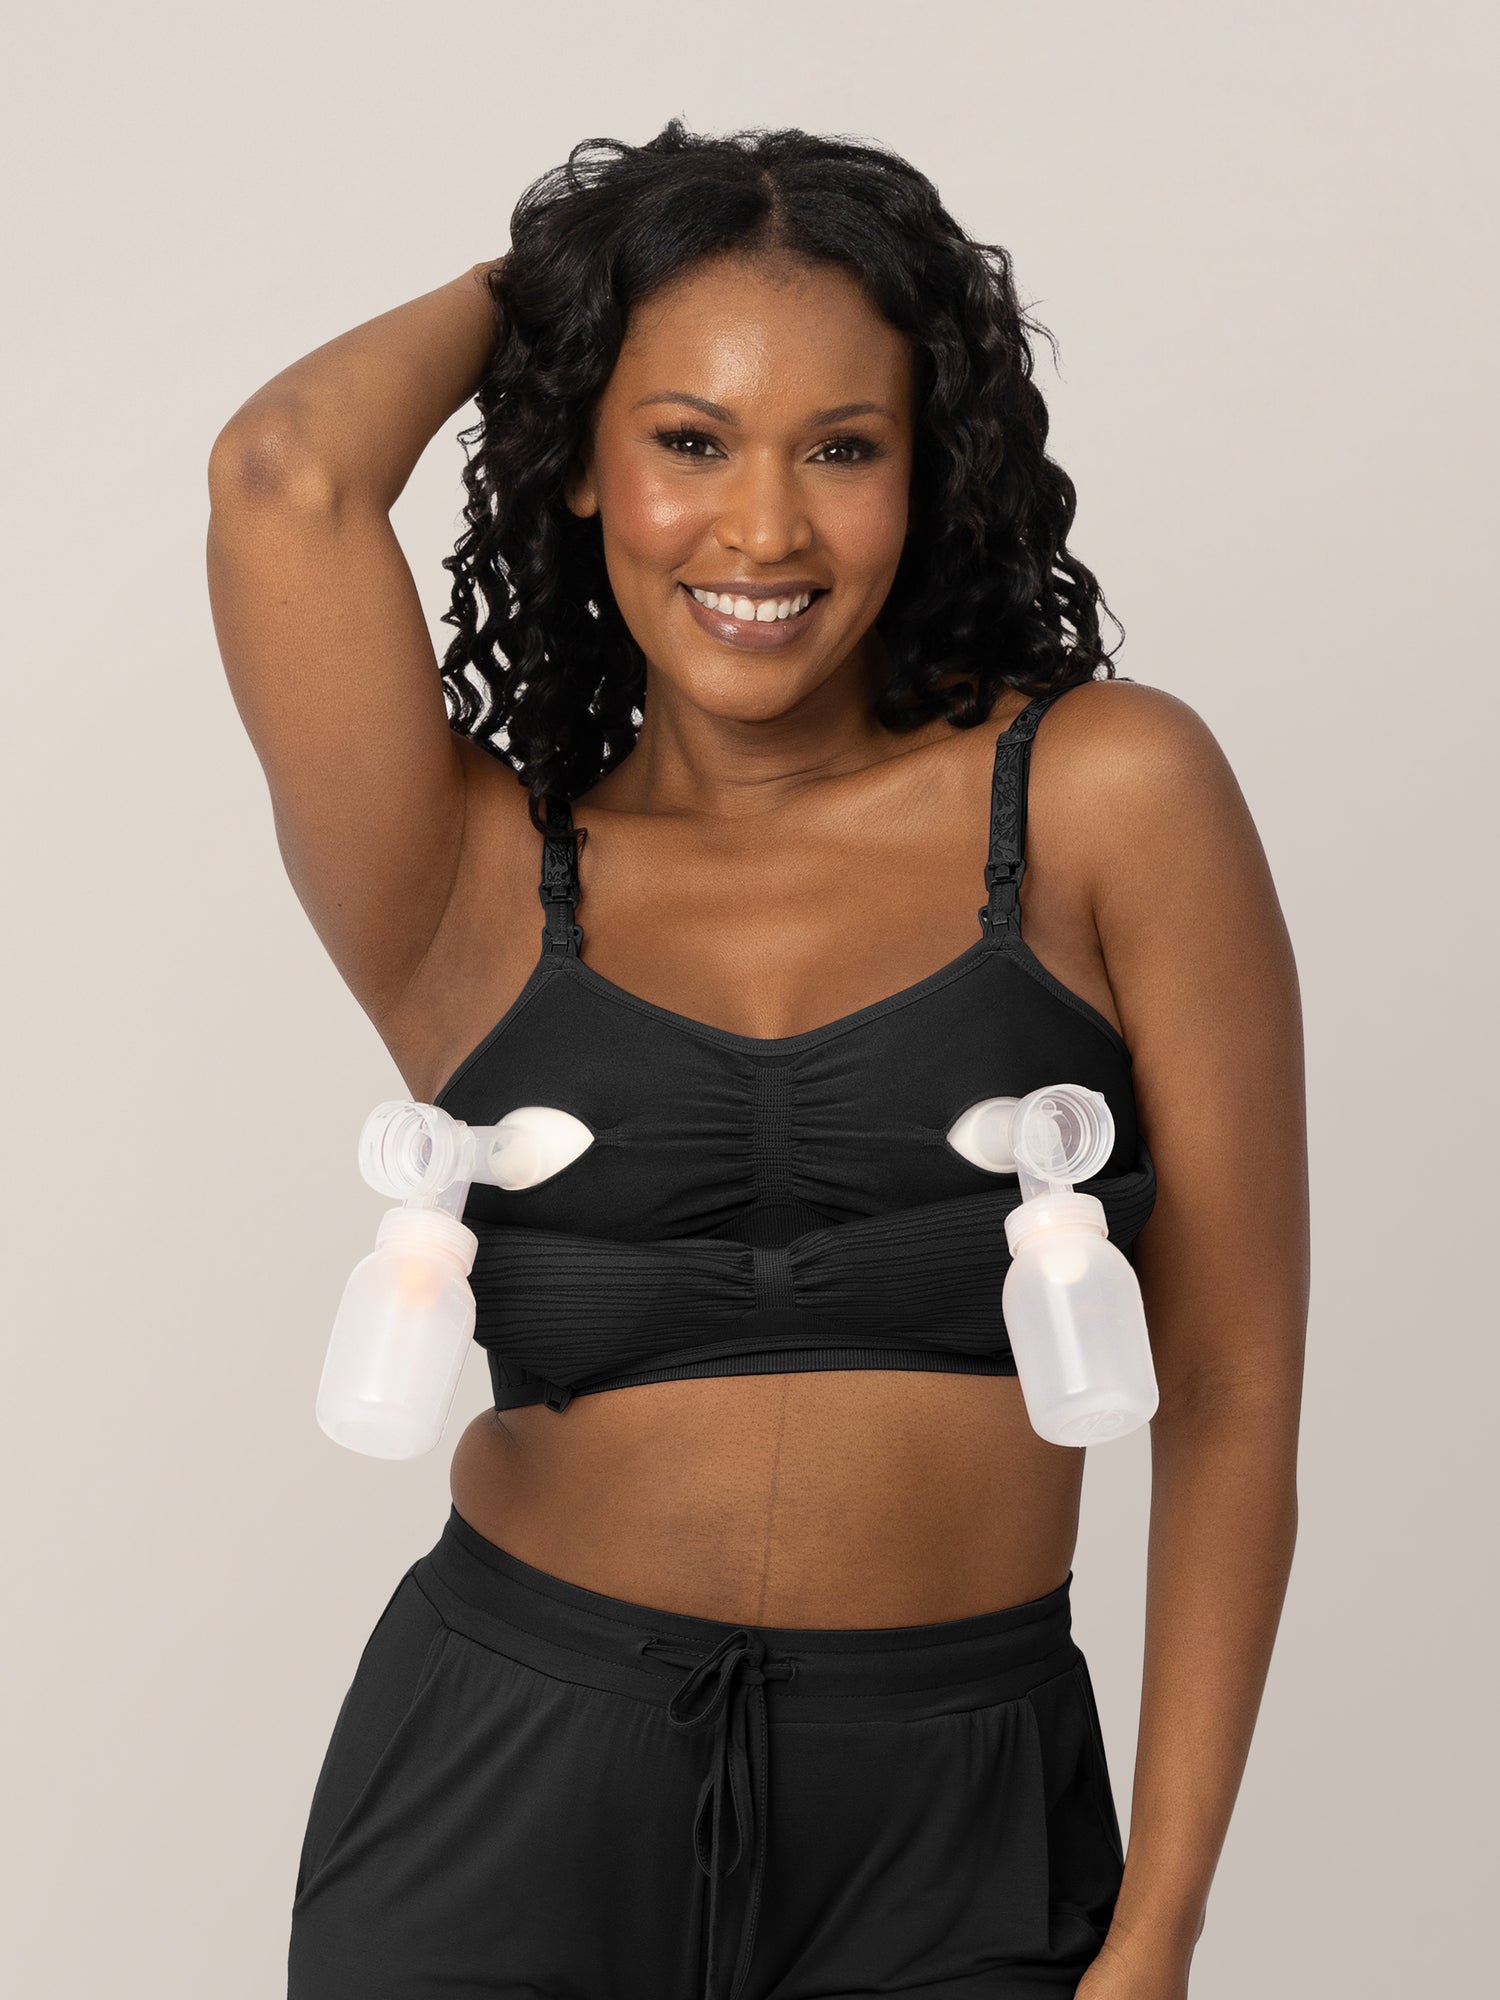 Womens $0 - $25 Shop Your Store Sports Bras.